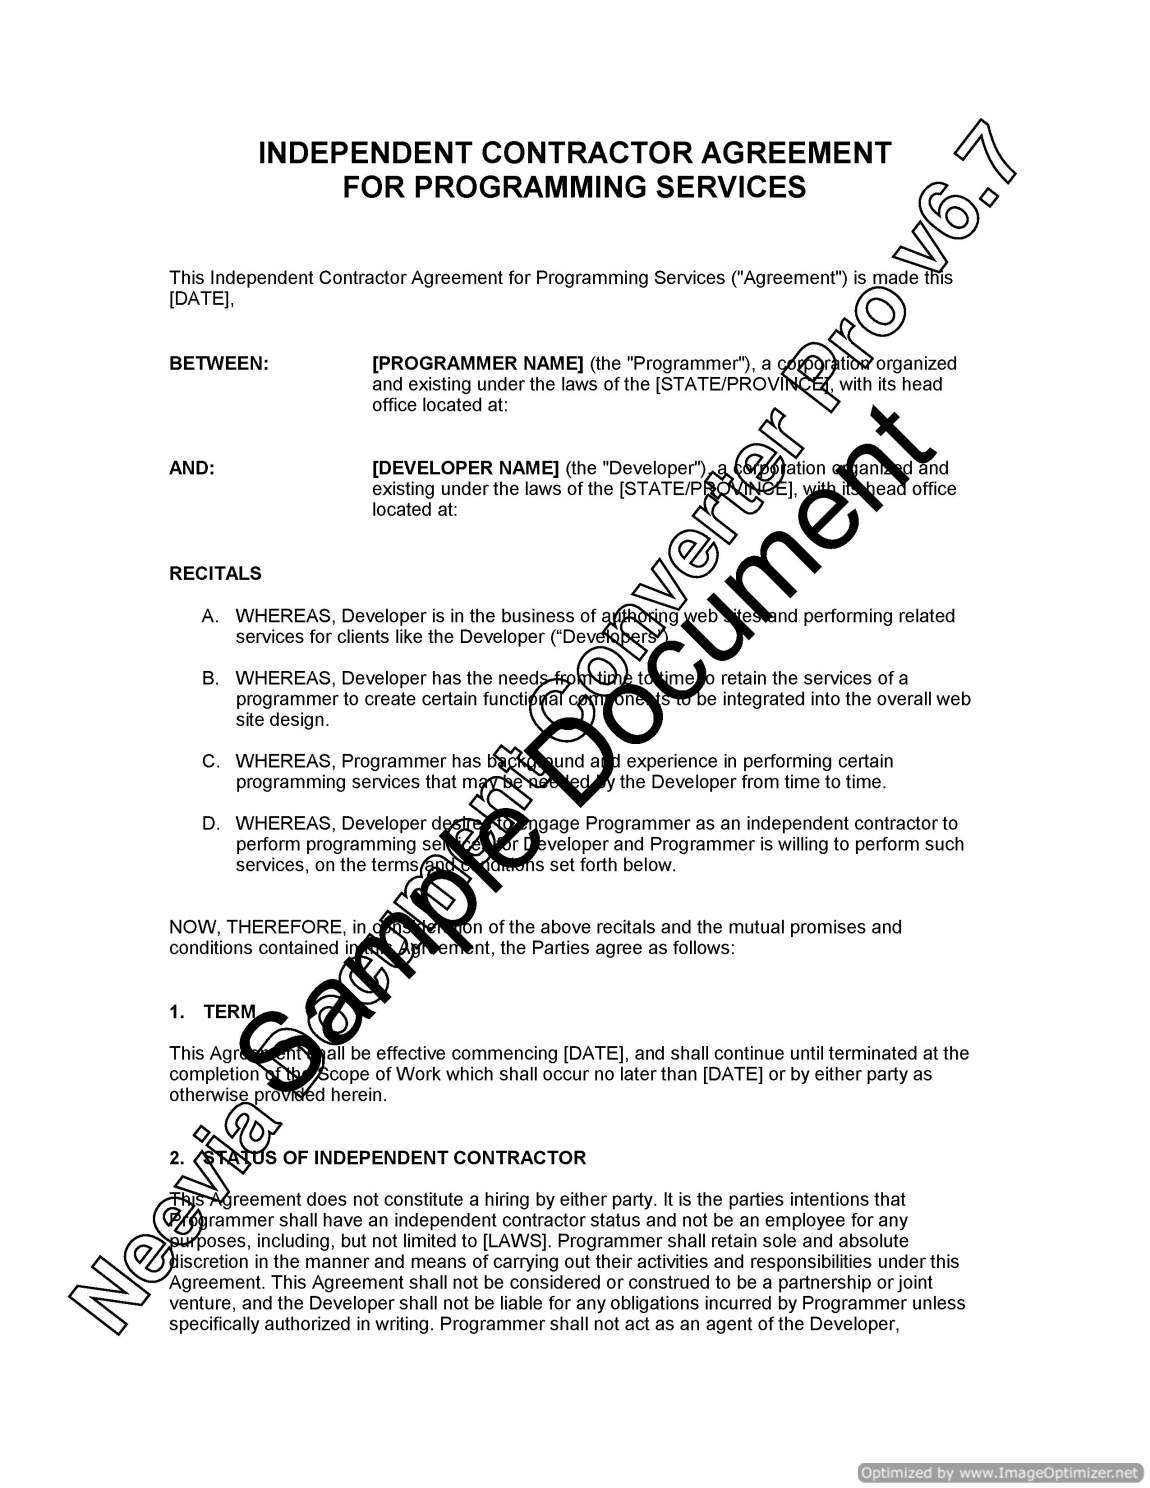 Independent Contractor Agreement For Programming Services Lawyer Document